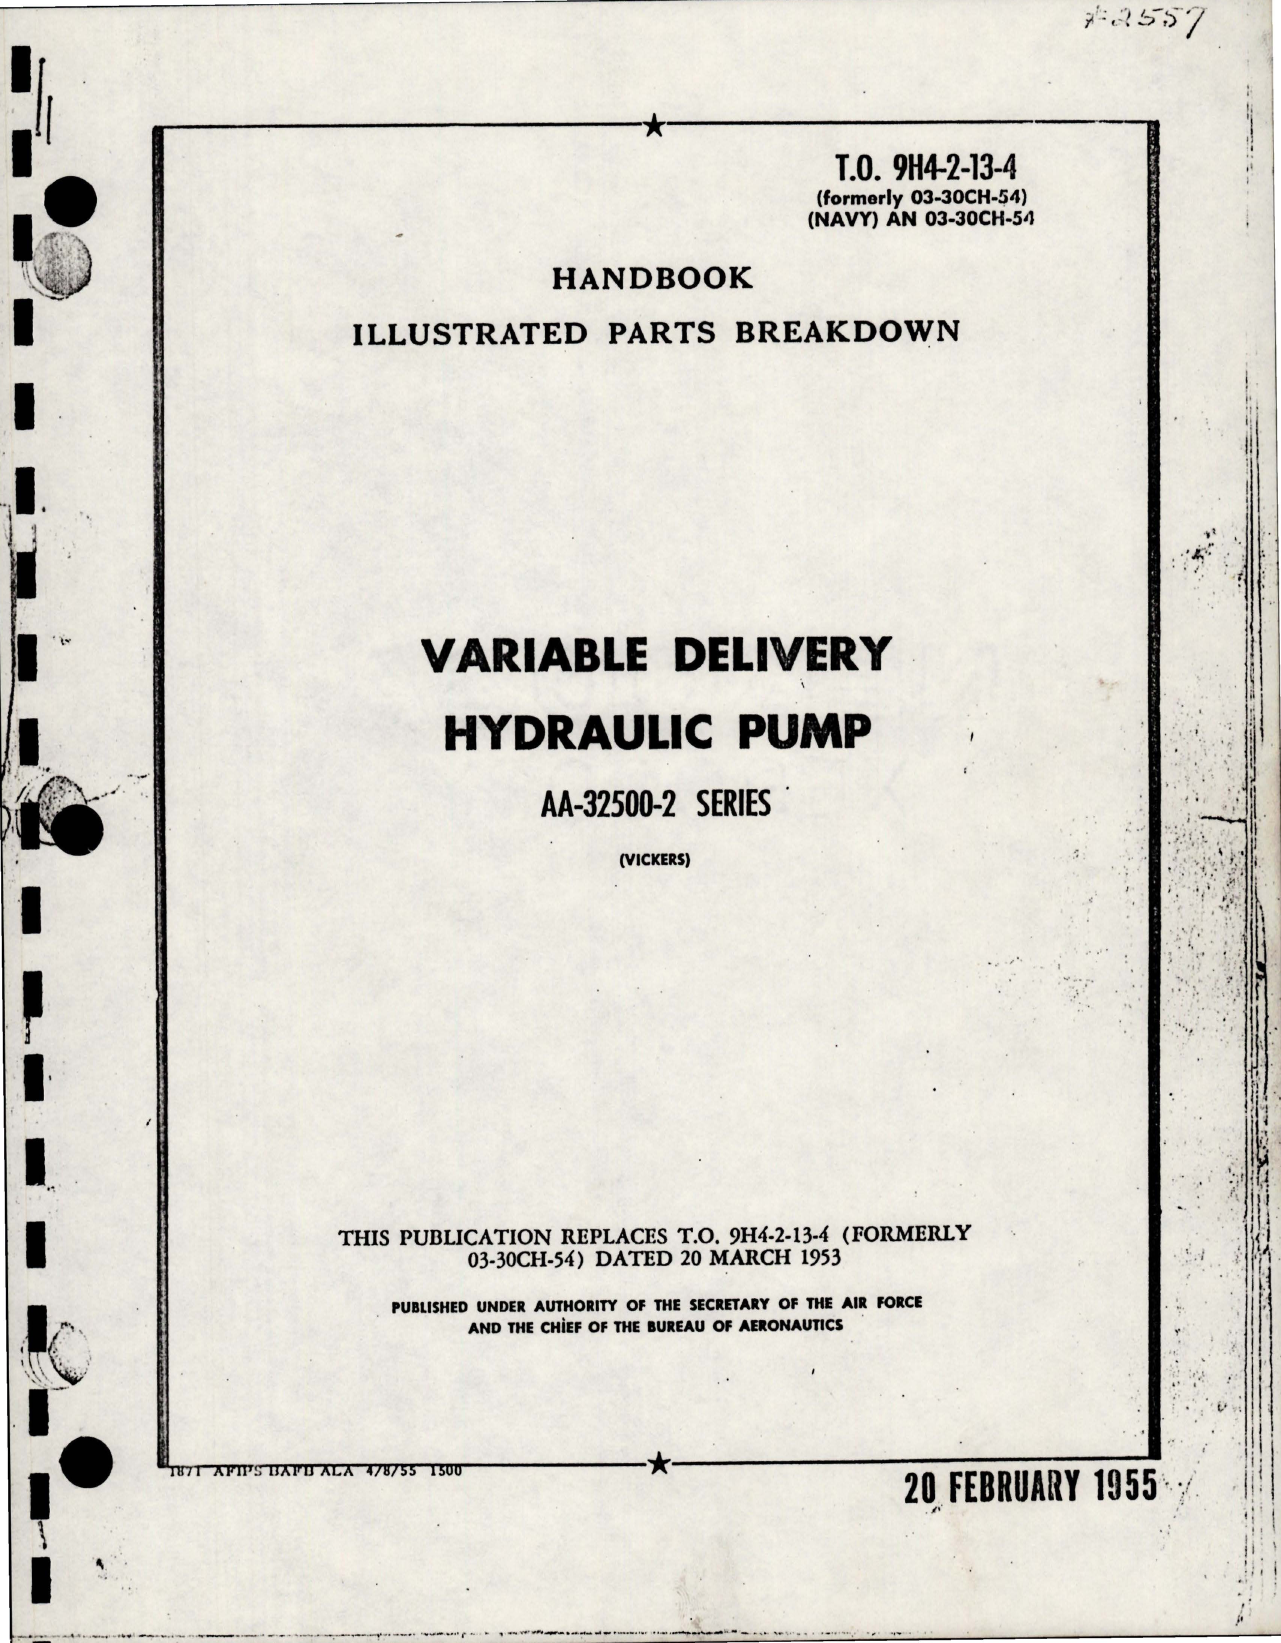 Sample page 1 from AirCorps Library document: Illustrated Parts Breakdown for Variable Delivery Hydraulic Pump AA-32500-2 Series 